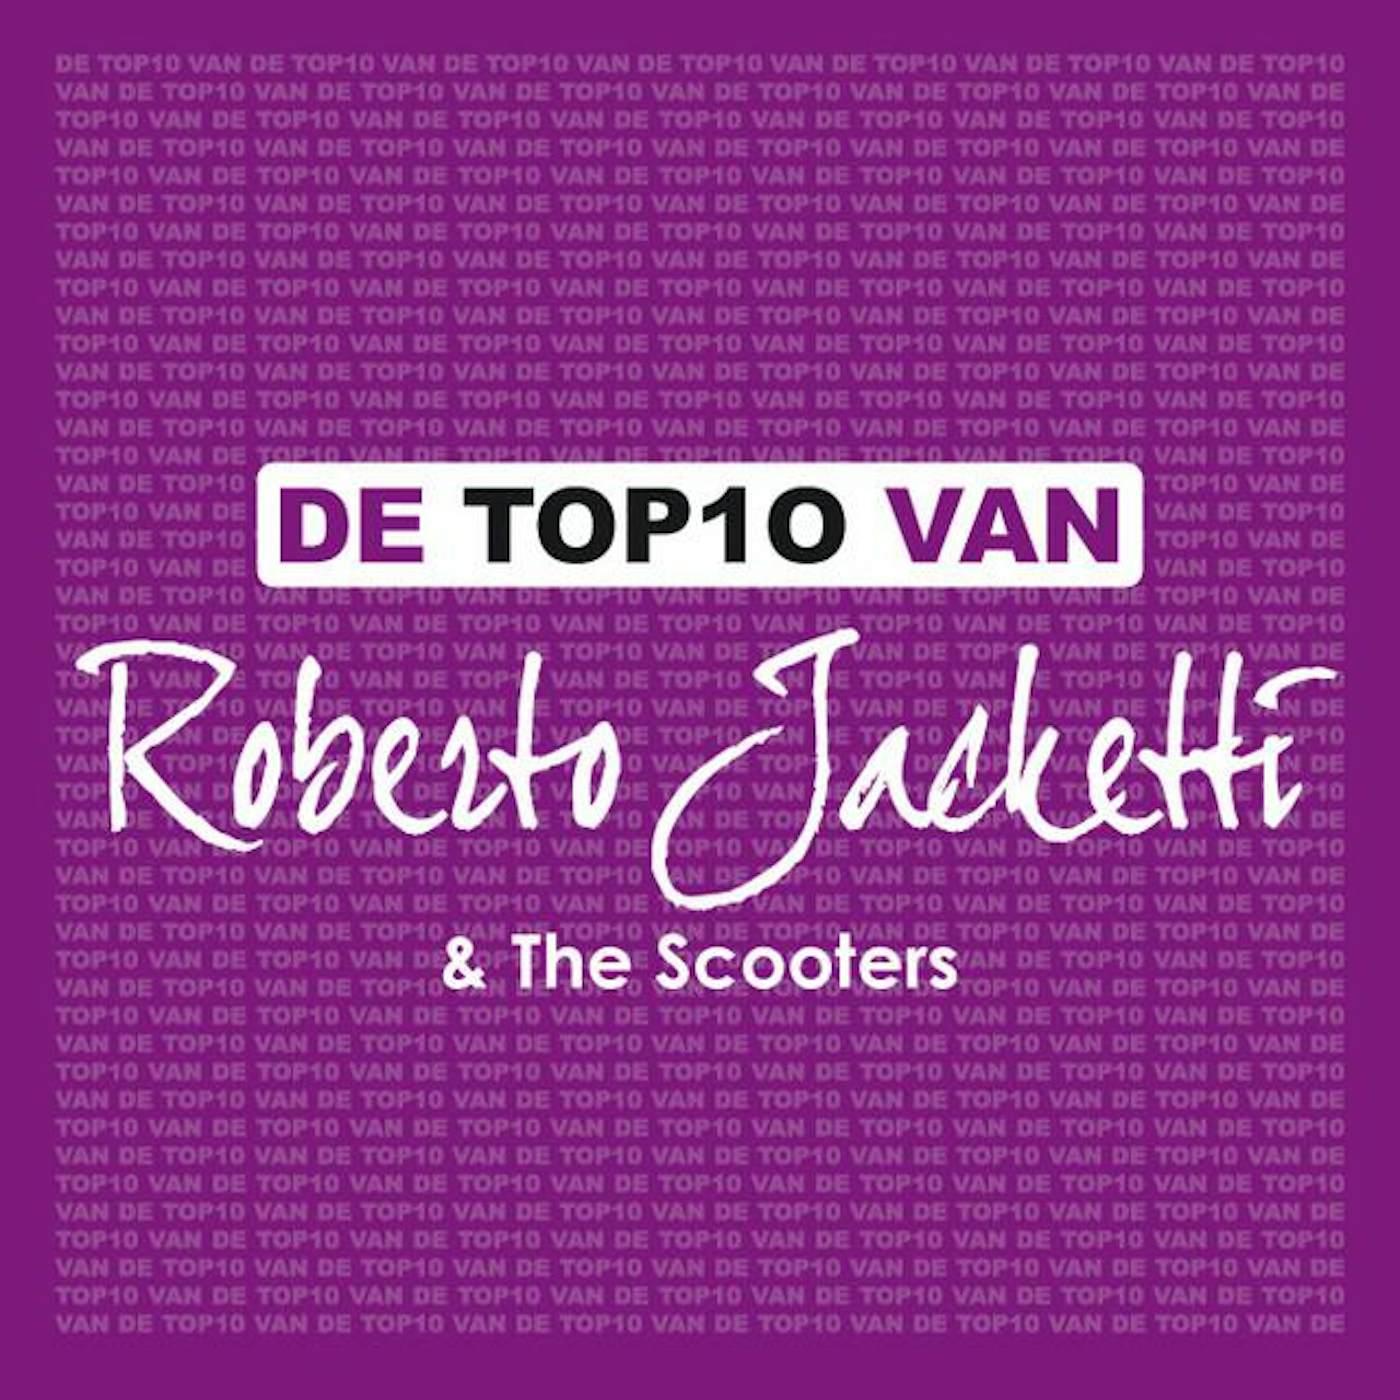 Roberto Jacketti & The Scooters